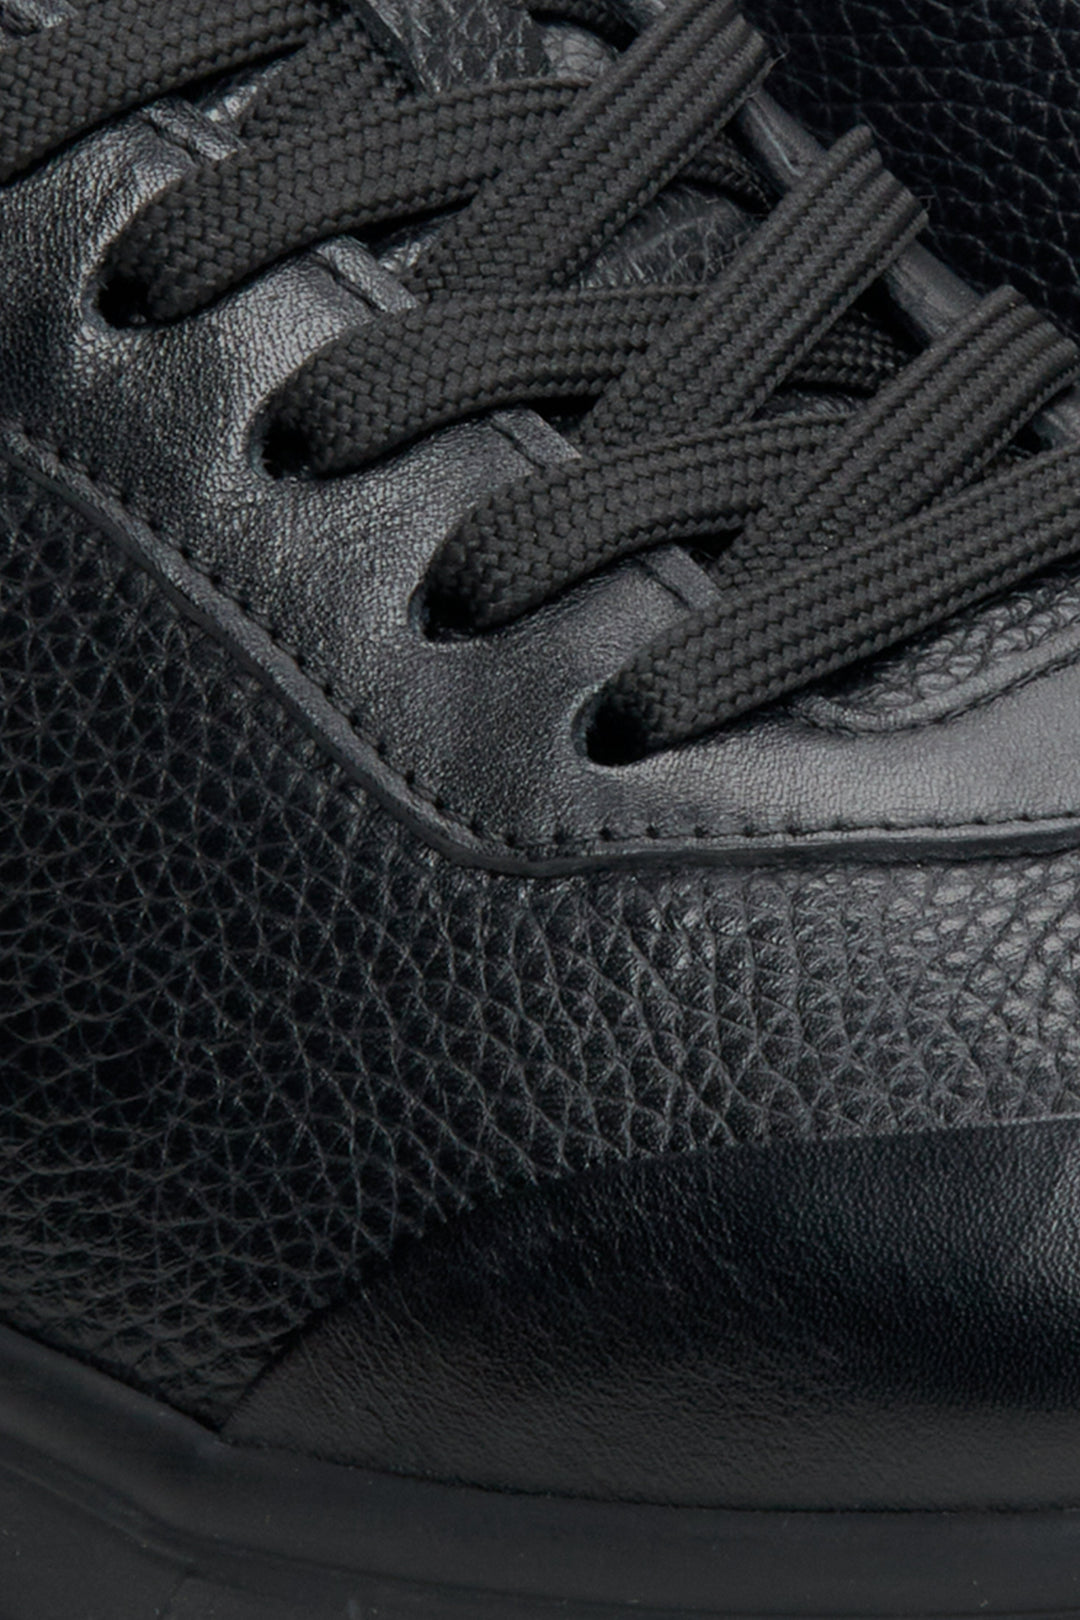 Men's soft leather sneakers in black by Estro - close-up on the lacing system.